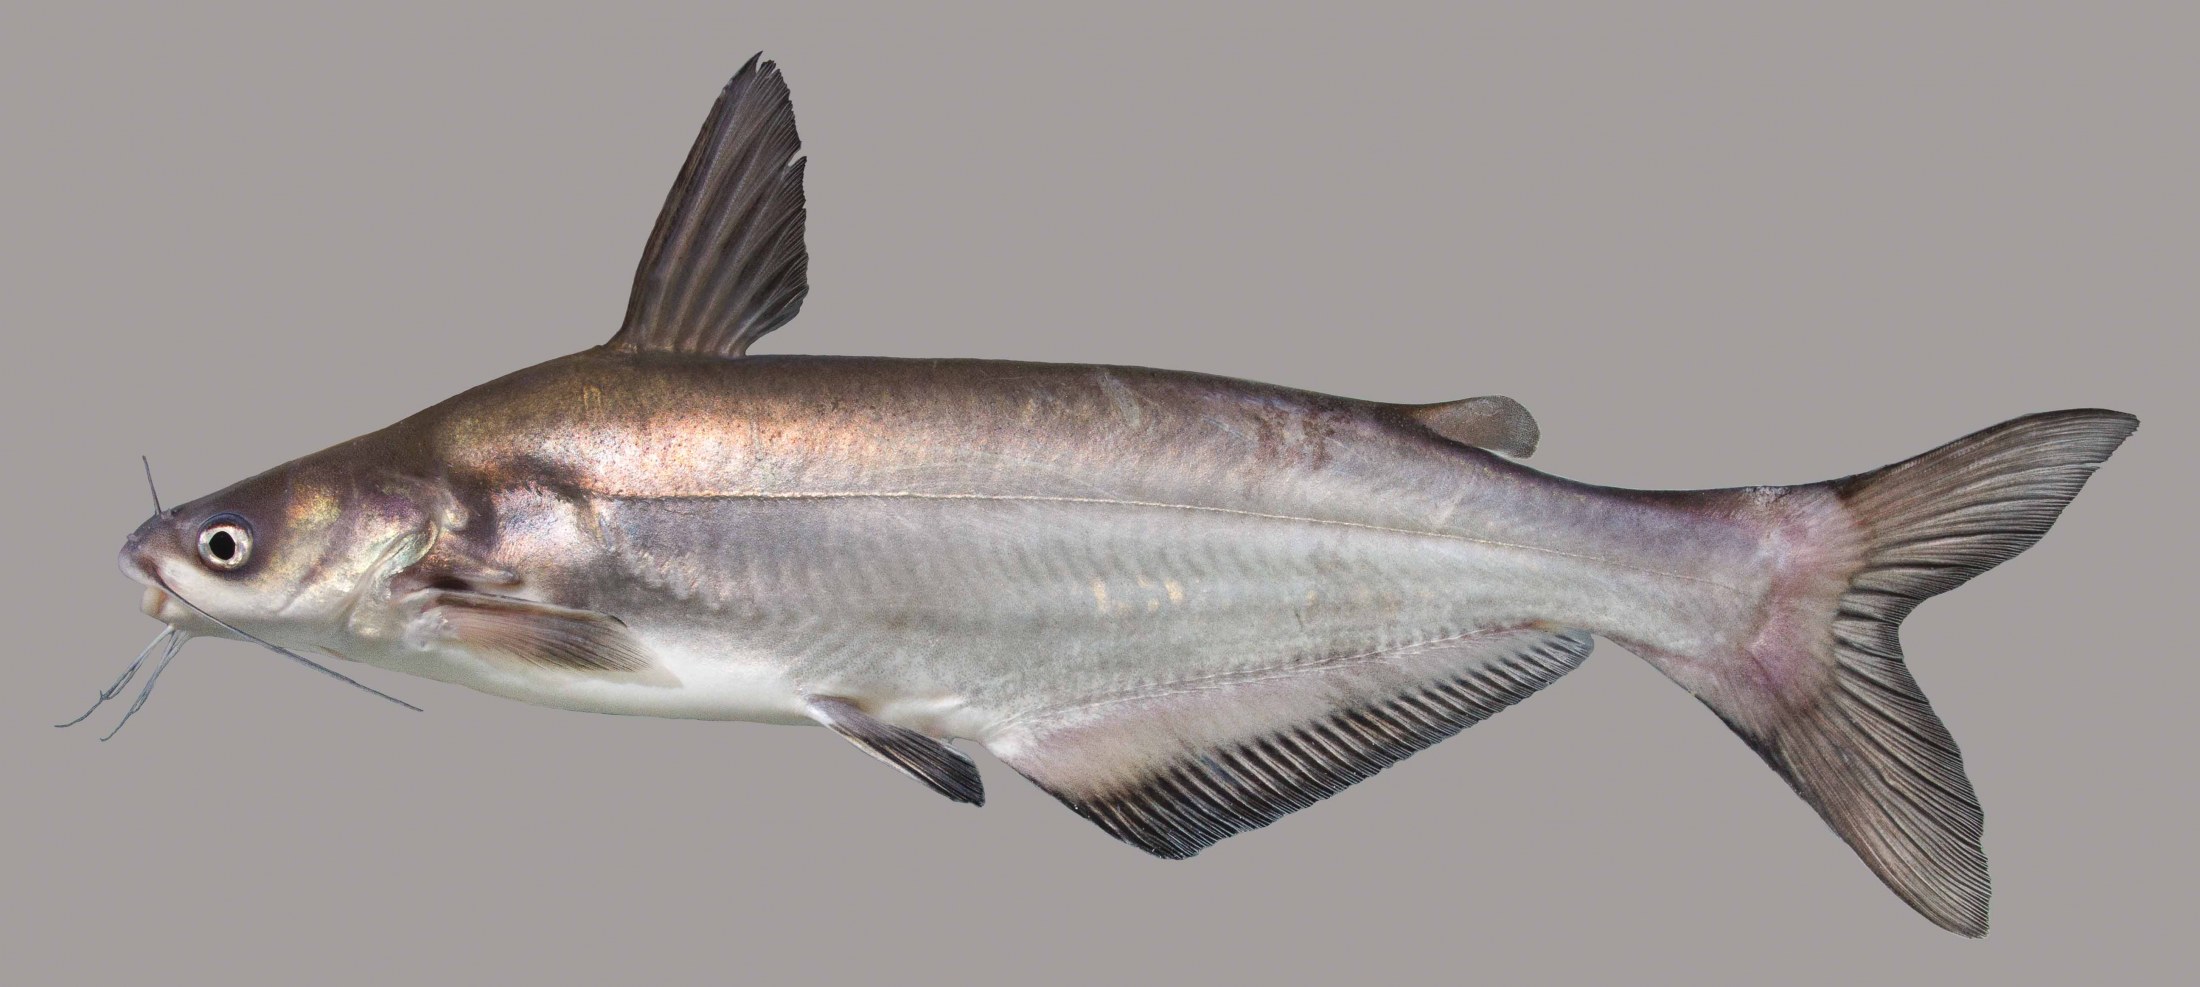 Lateral view of a blue catfish